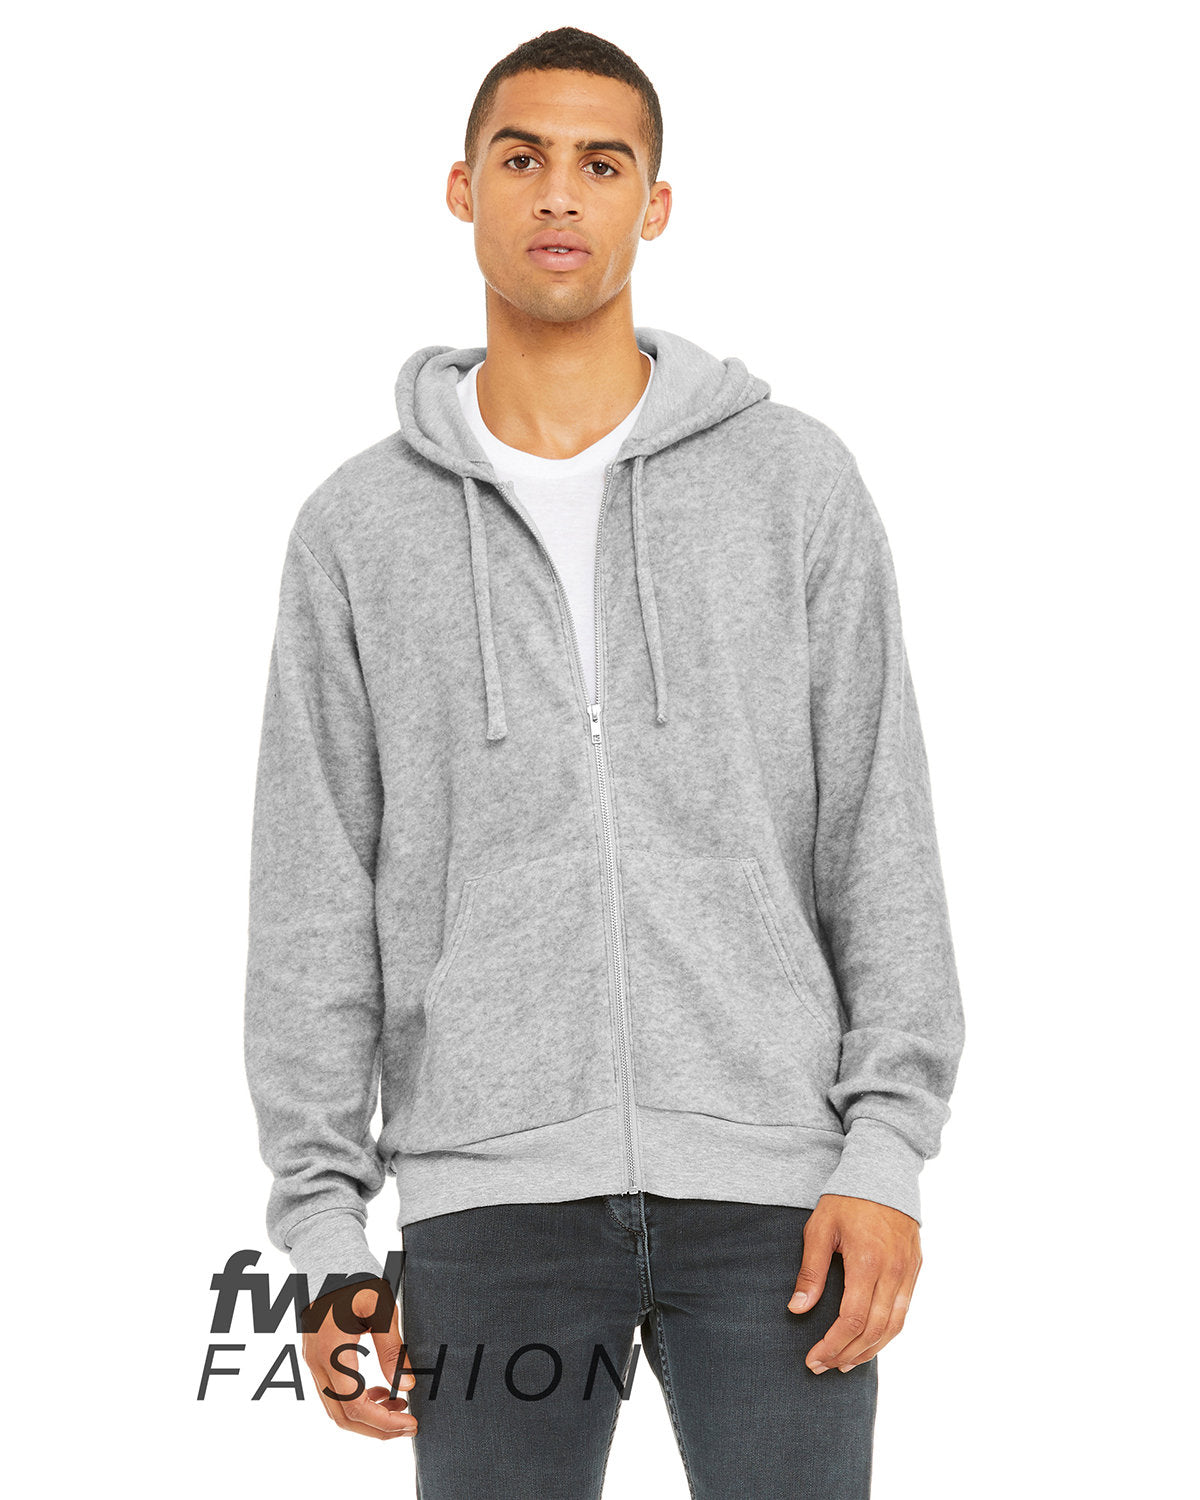 ELEVATE-YOUR-WARDROBE-BELLA-CANVAS-FWD-FASHION-ADULT-SUEDED-FLEECE-FULL-ZIP-HOODED-SWEATSHIRT-FOR-ULTIMATE-STYLE-AND-COZY-COMFORT